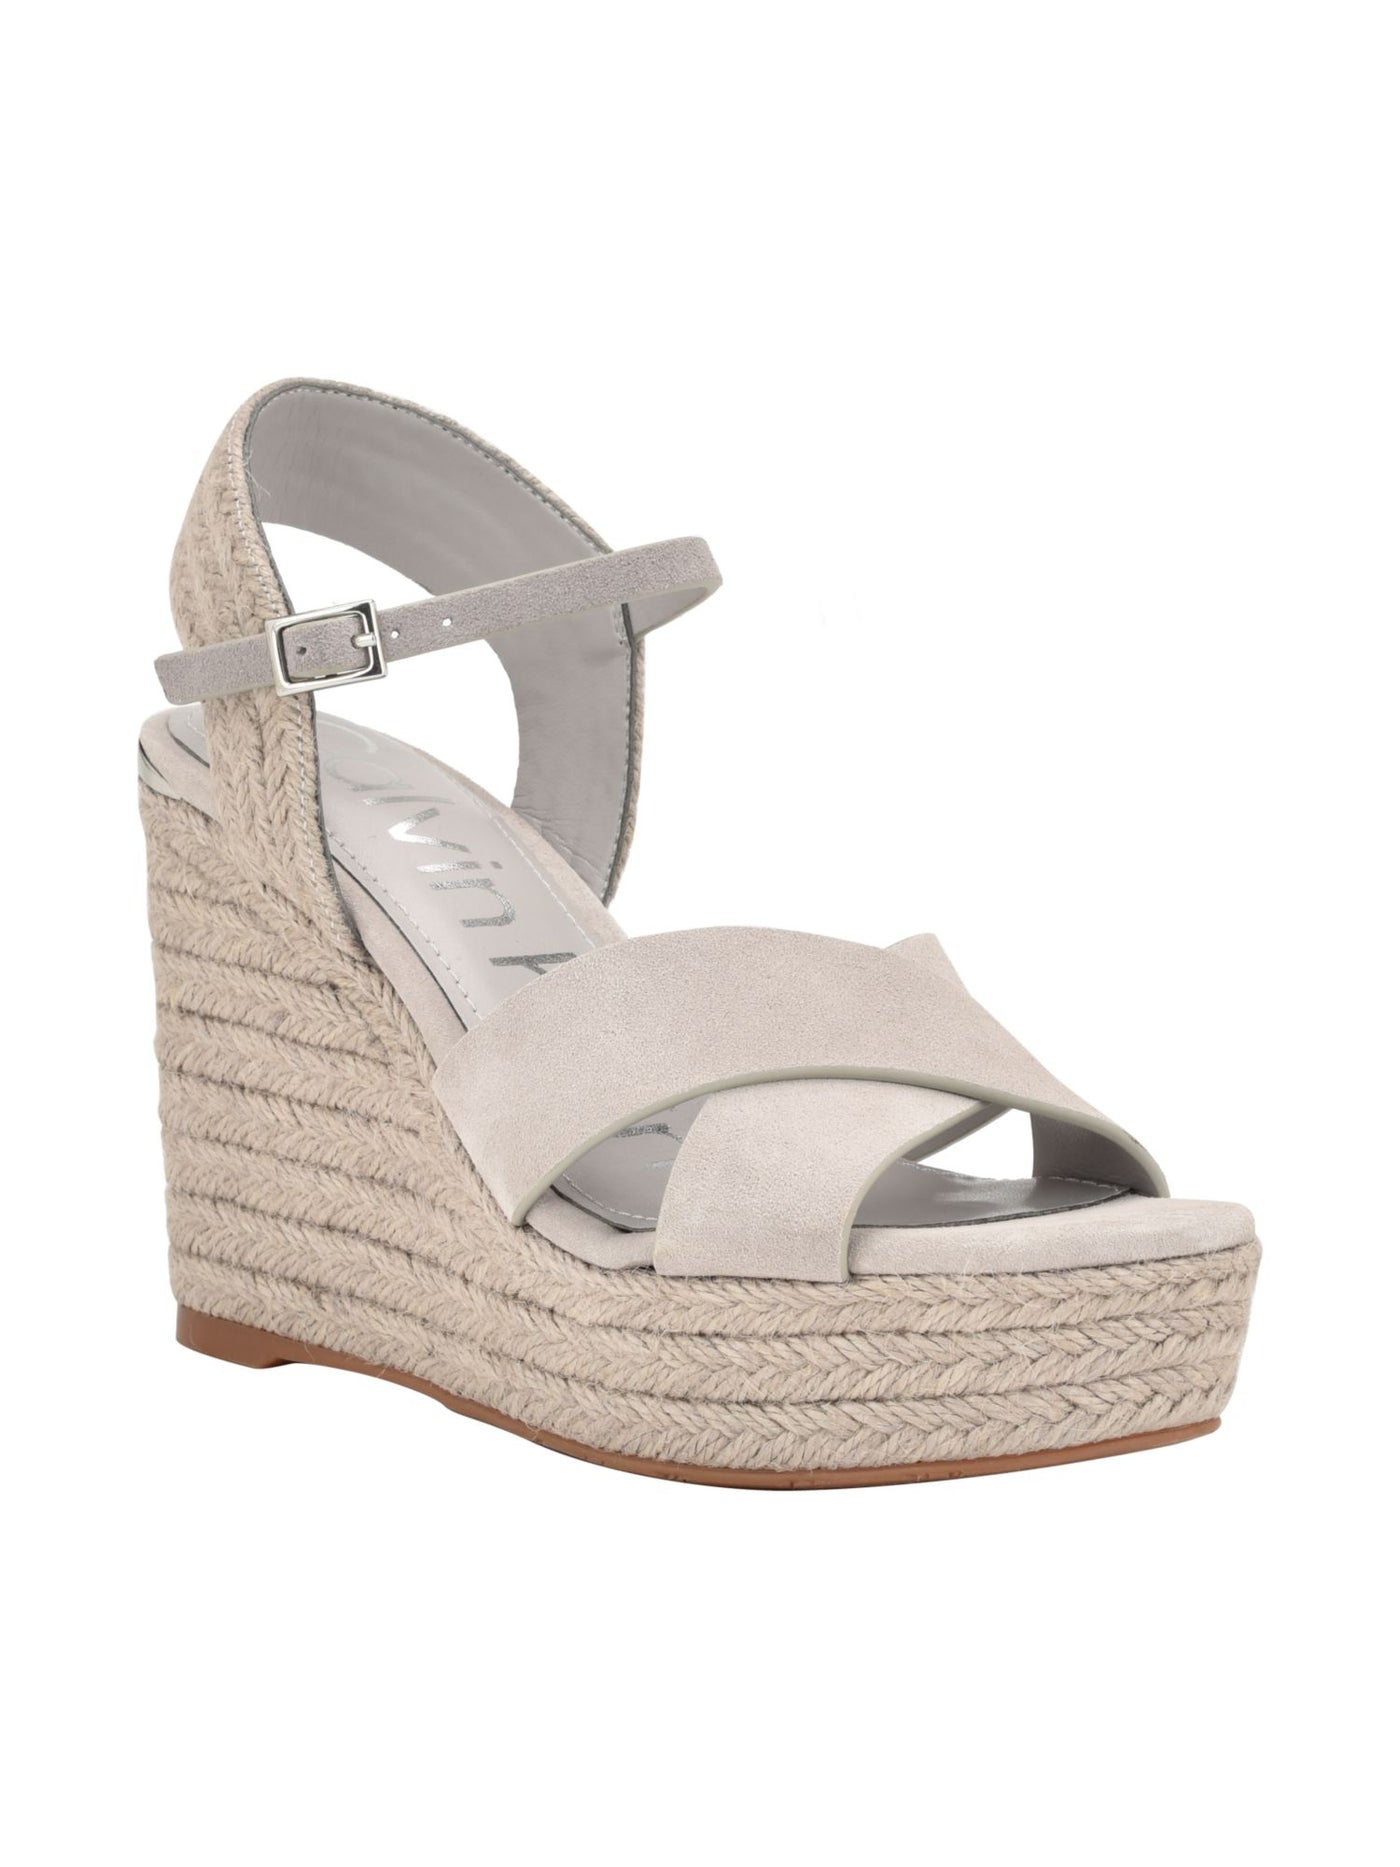 CALVIN KLEIN Womens Gray 1" Platform Padded Strappy Elory Almond Toe Wedge Buckle Leather Espadrille Shoes 10 M